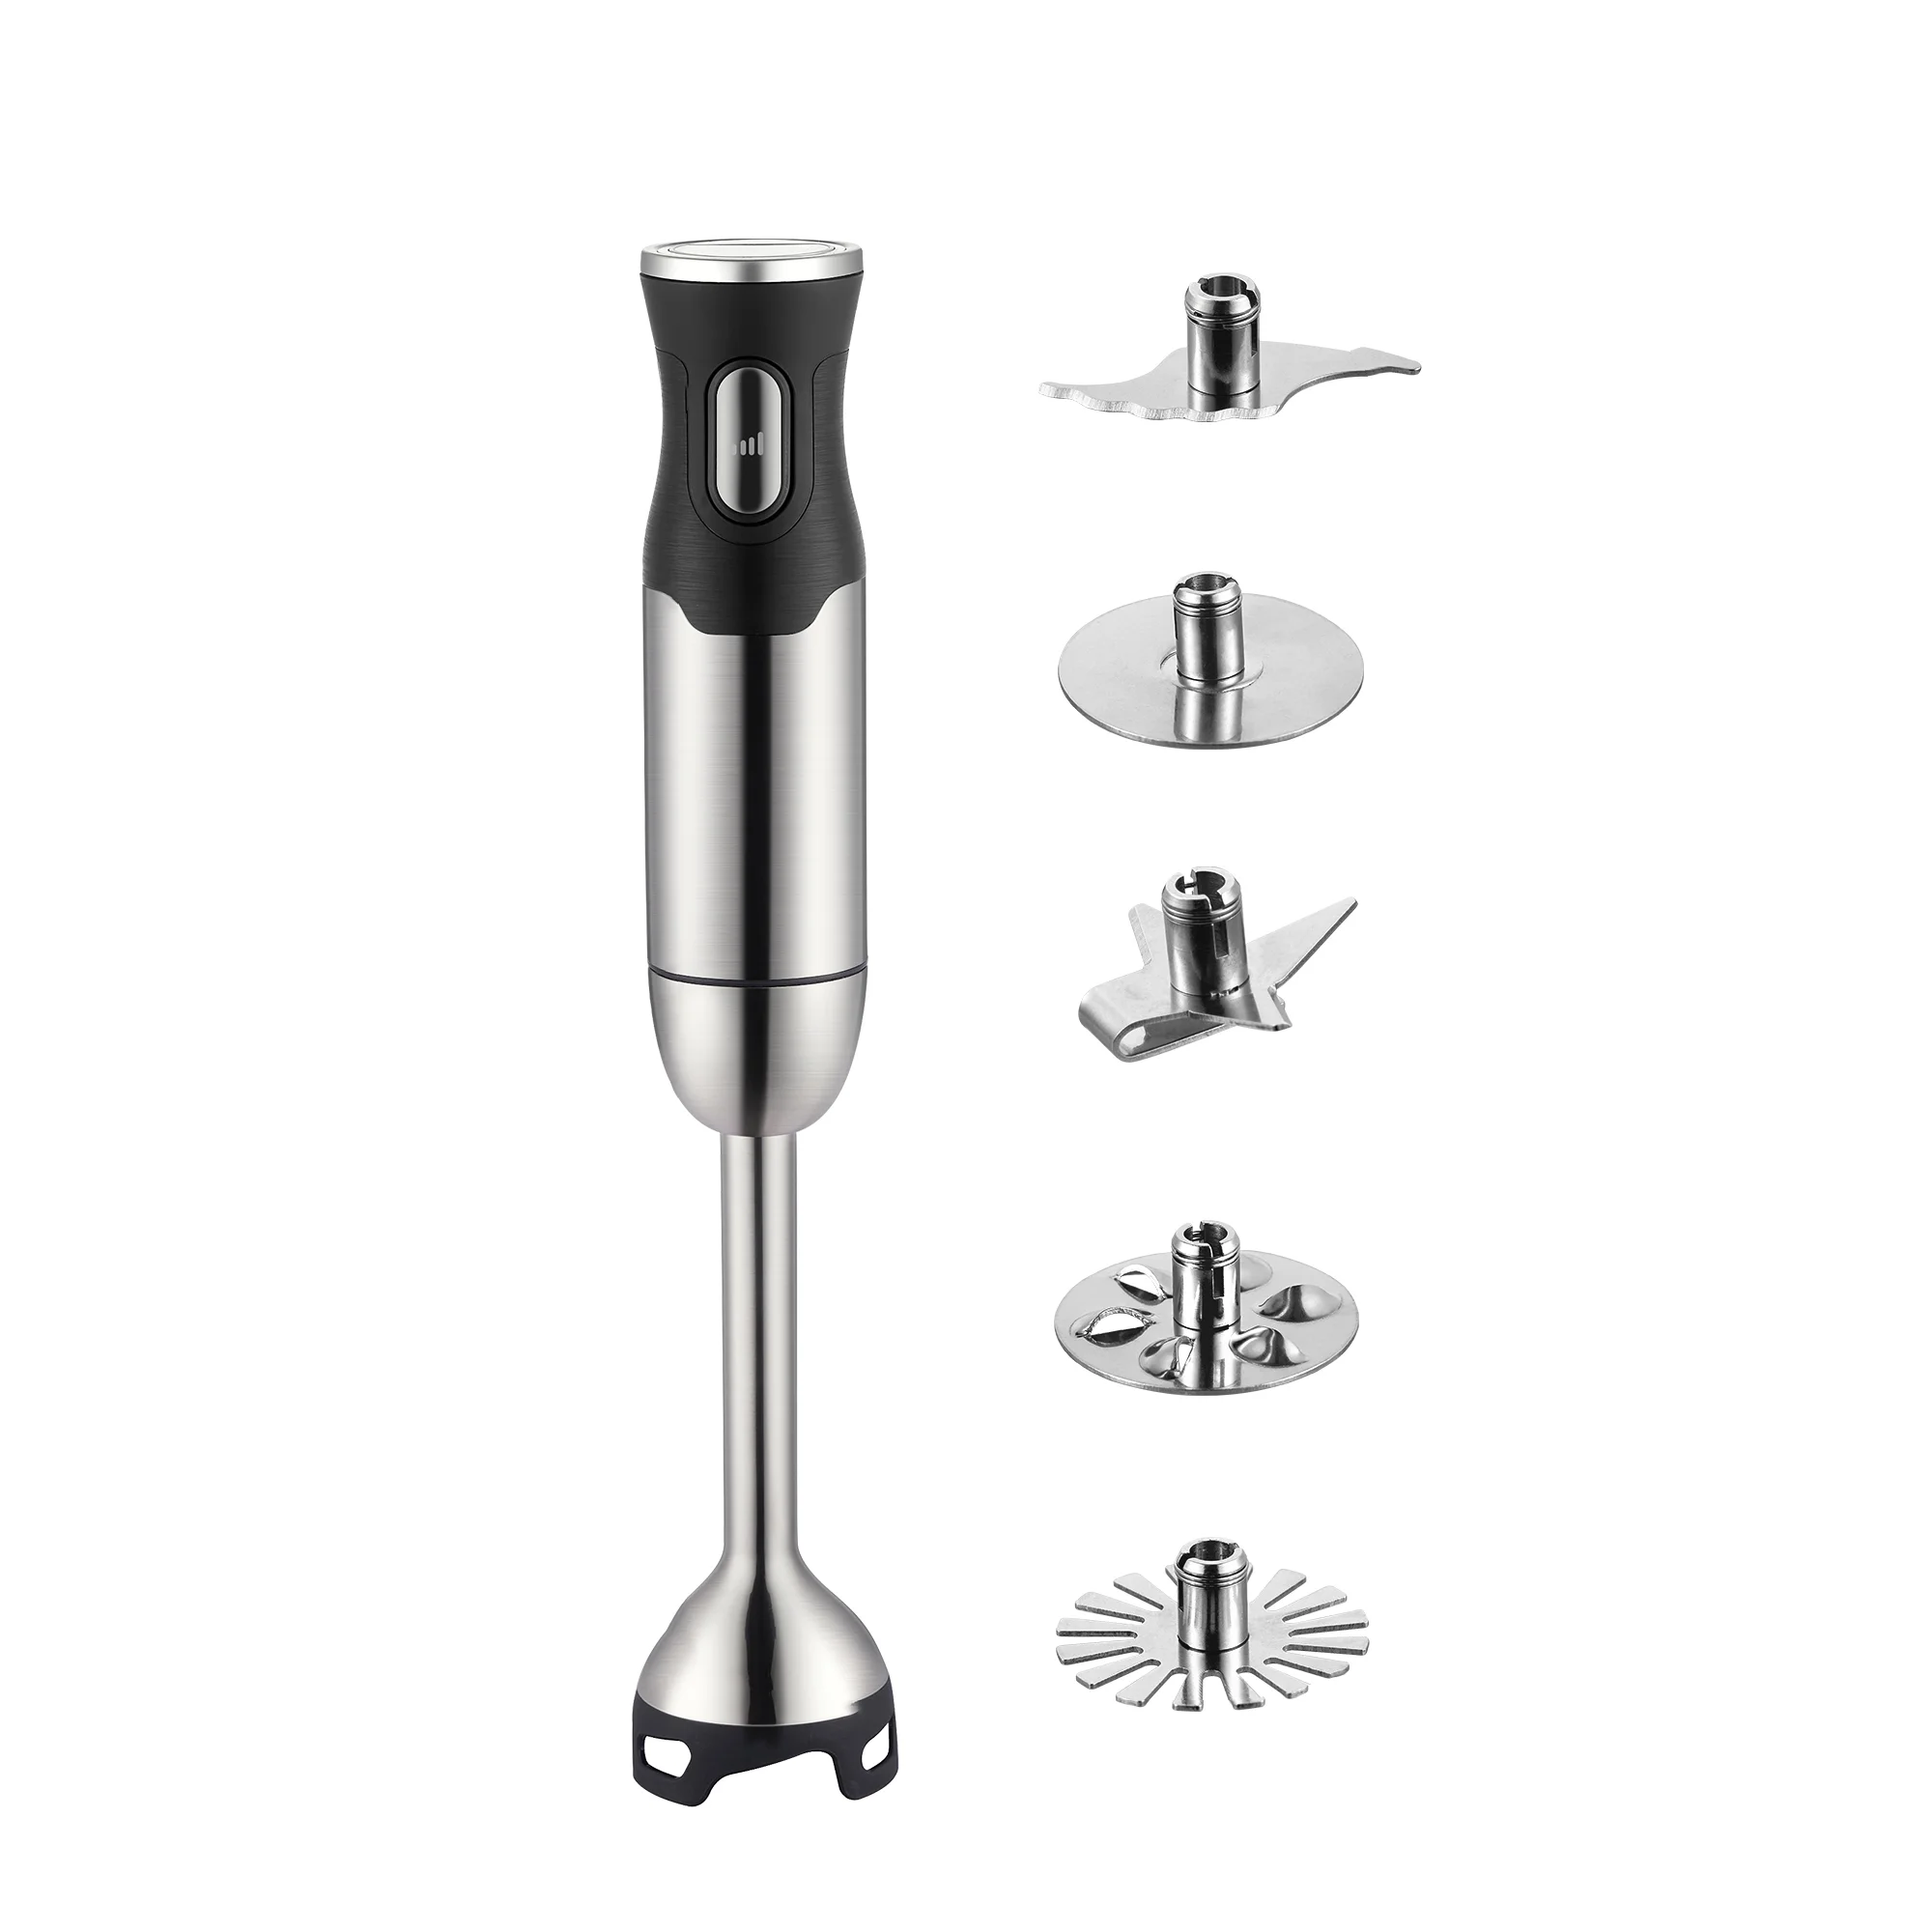 Hot Sale Stainless Steel Smoothie Maker Stick Blender Smart Home Appliances  Kitchen Electric Hand Blender 1000w - Buy New Electric Hand Blender,Smoothie  Maker Blender,Kitchen Appliances Hand Blender Product on 